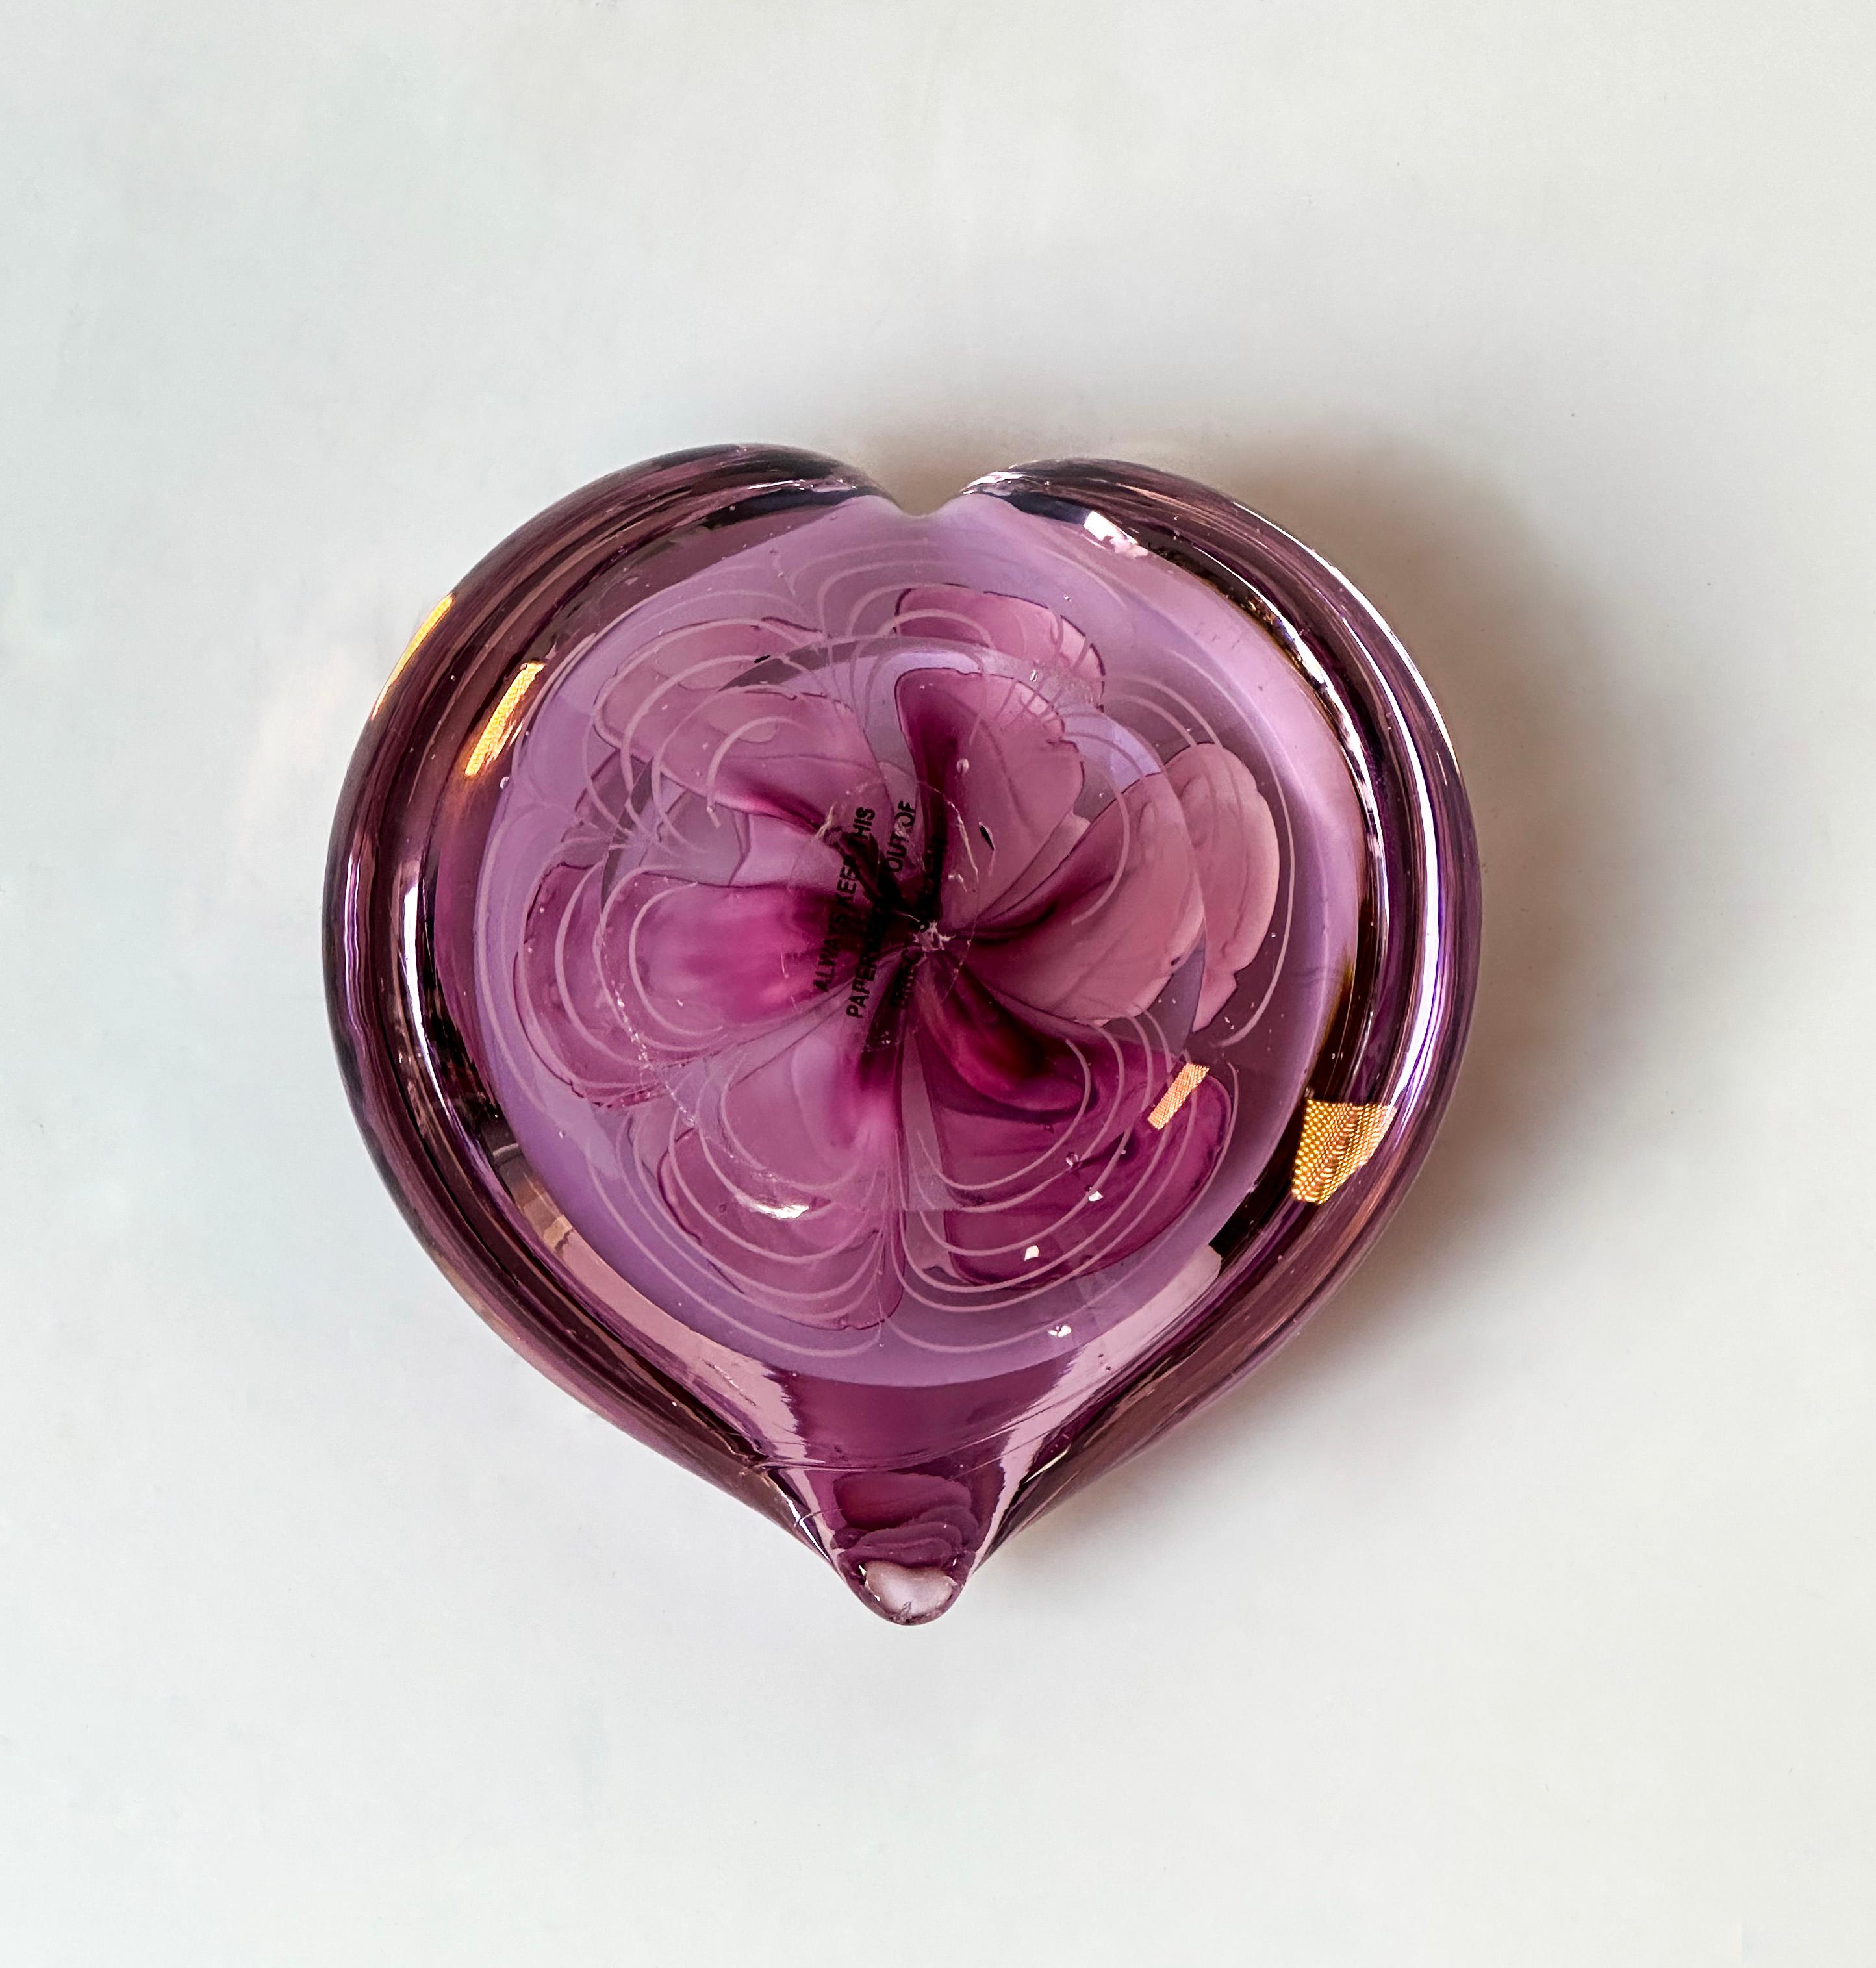 Late 20th Century Vintage Heart Shaped Pink Glass Paperweight with Rose Petal Centre